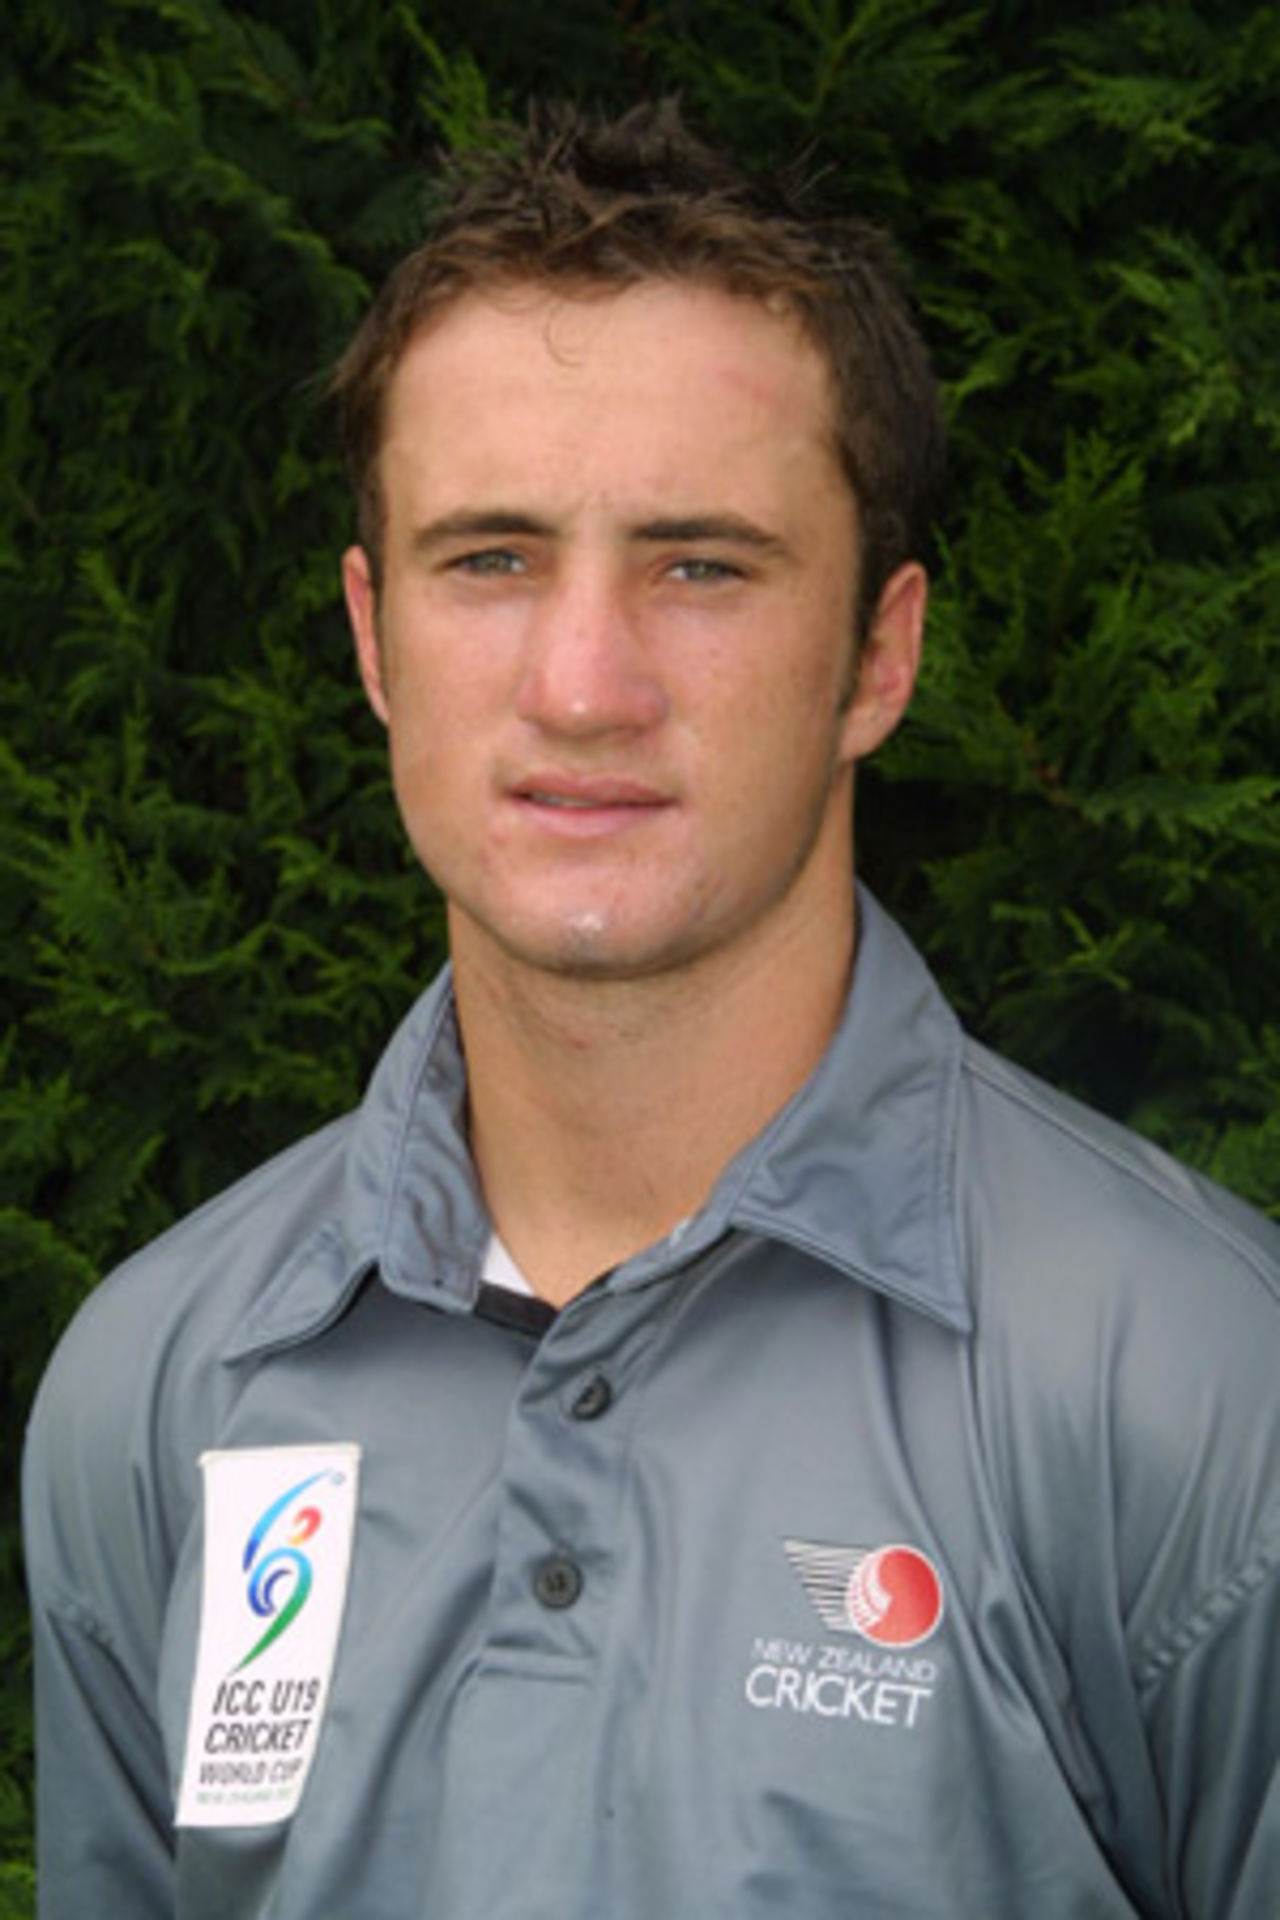 Portrait of Neil Broom, January 2002 - New Zealand Under-19 player for the ICC Under-19 World Cup 2002.